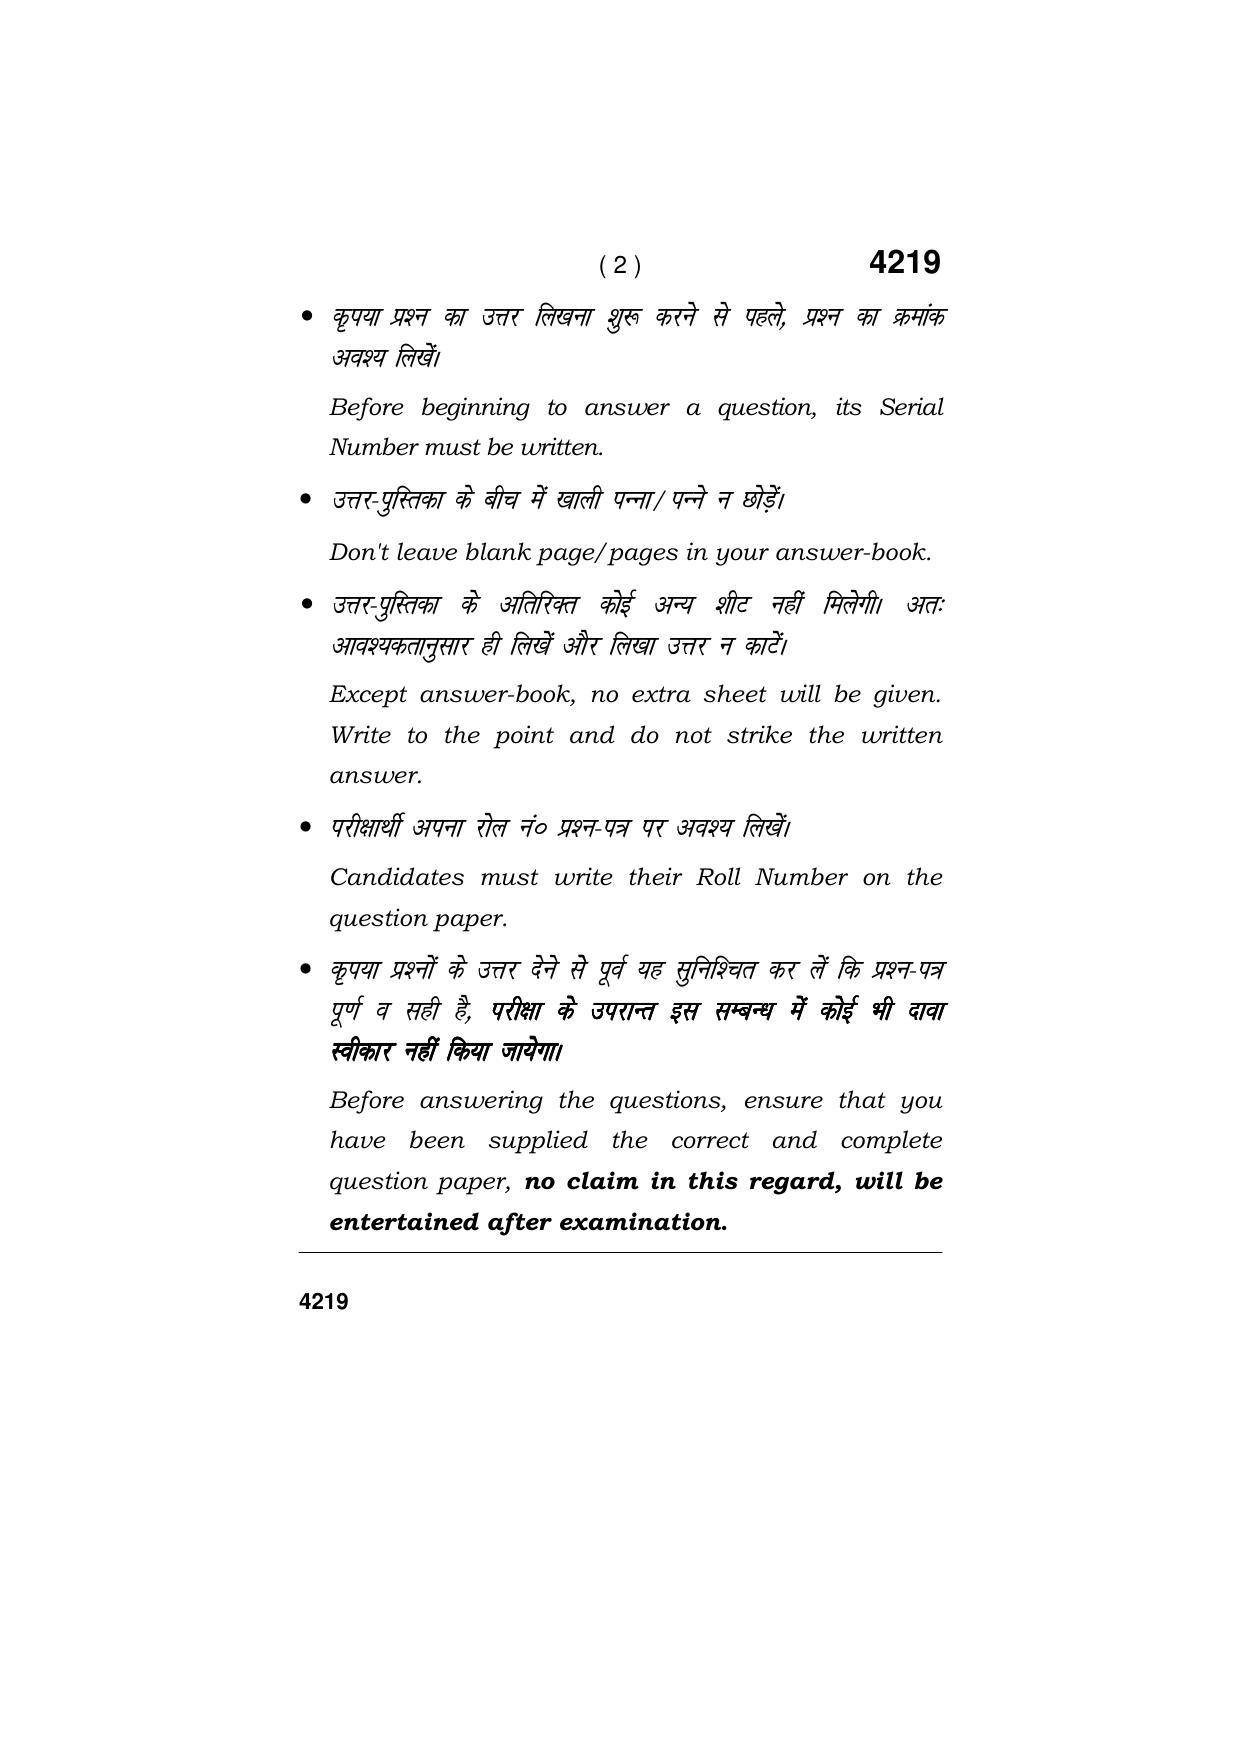 Haryana Board HBSE Class 10 Music Hindustani (Instrumental) 2019 Question Paper - Page 2